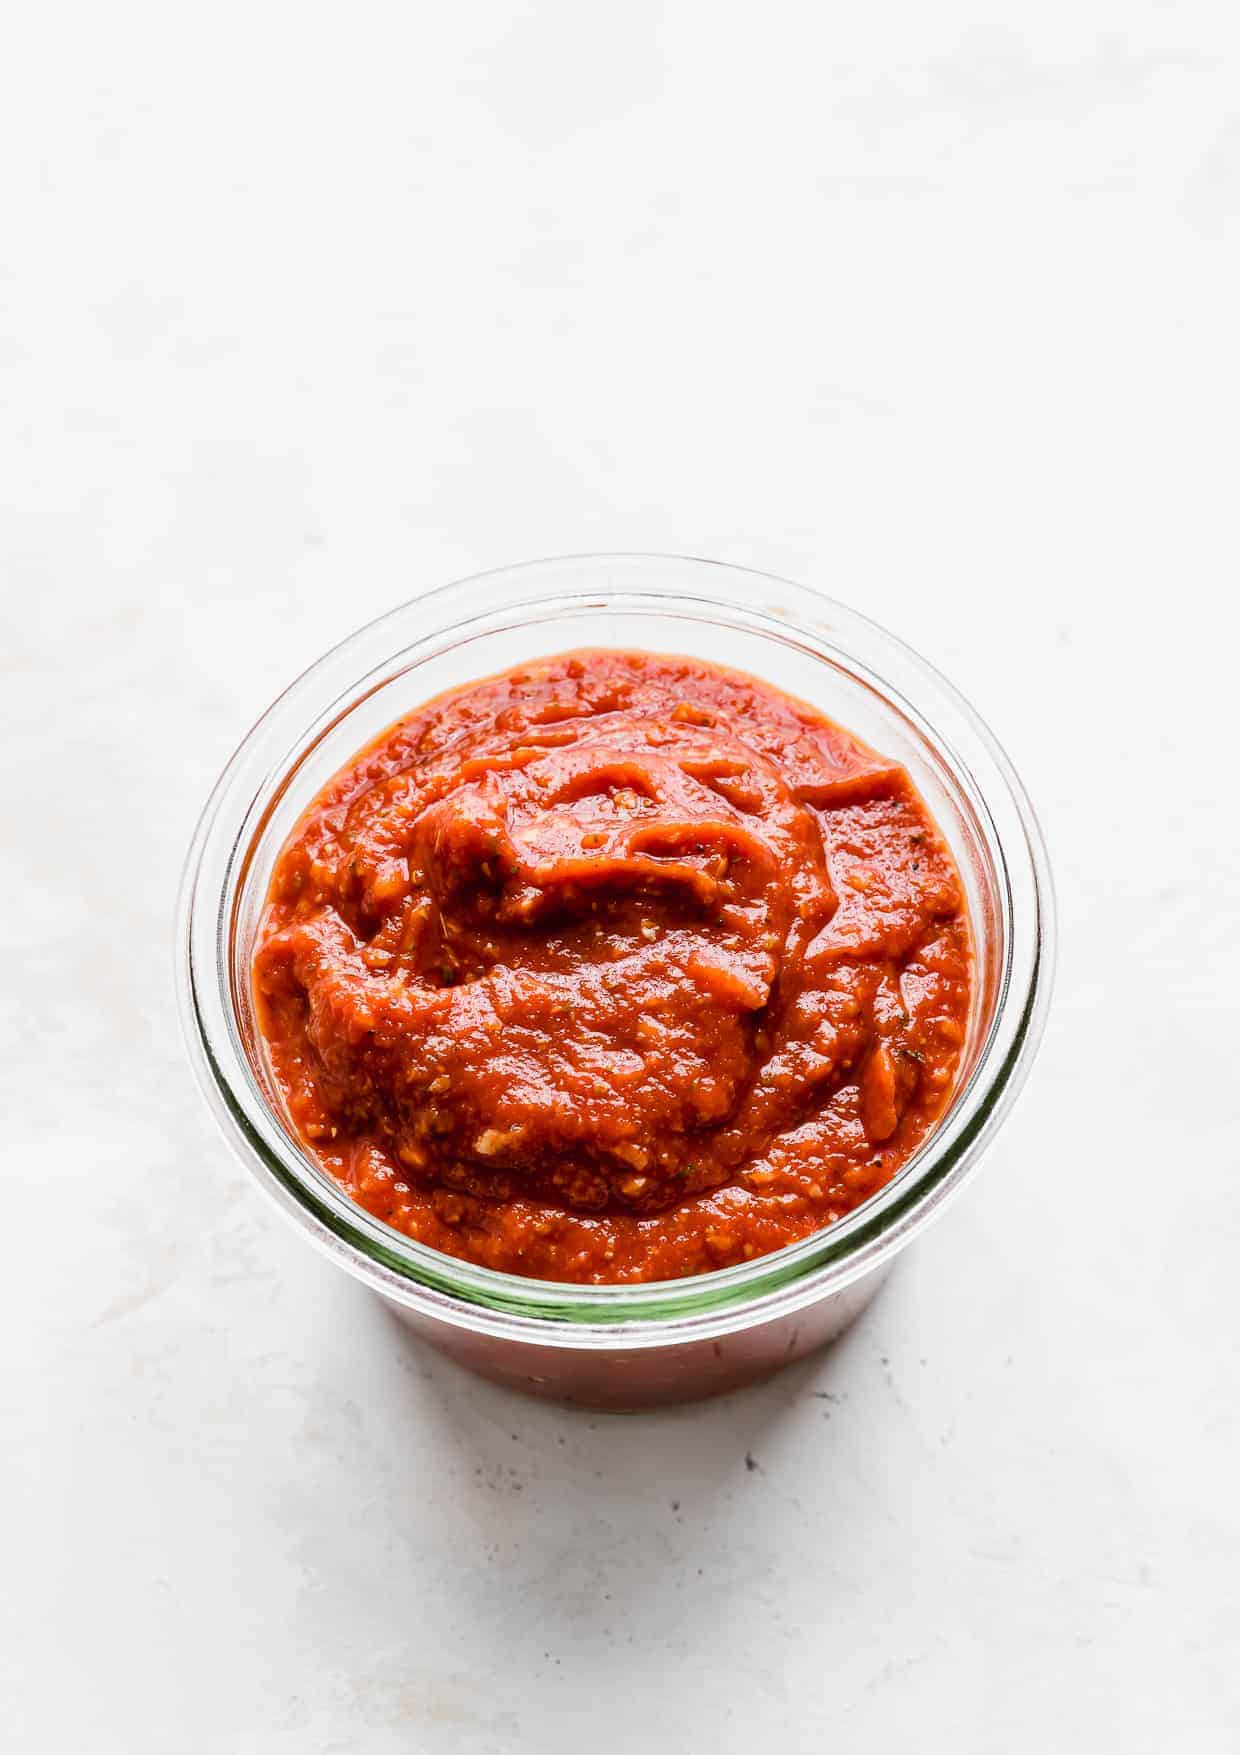 A jar of tomato paste pizza sauce against a white background.